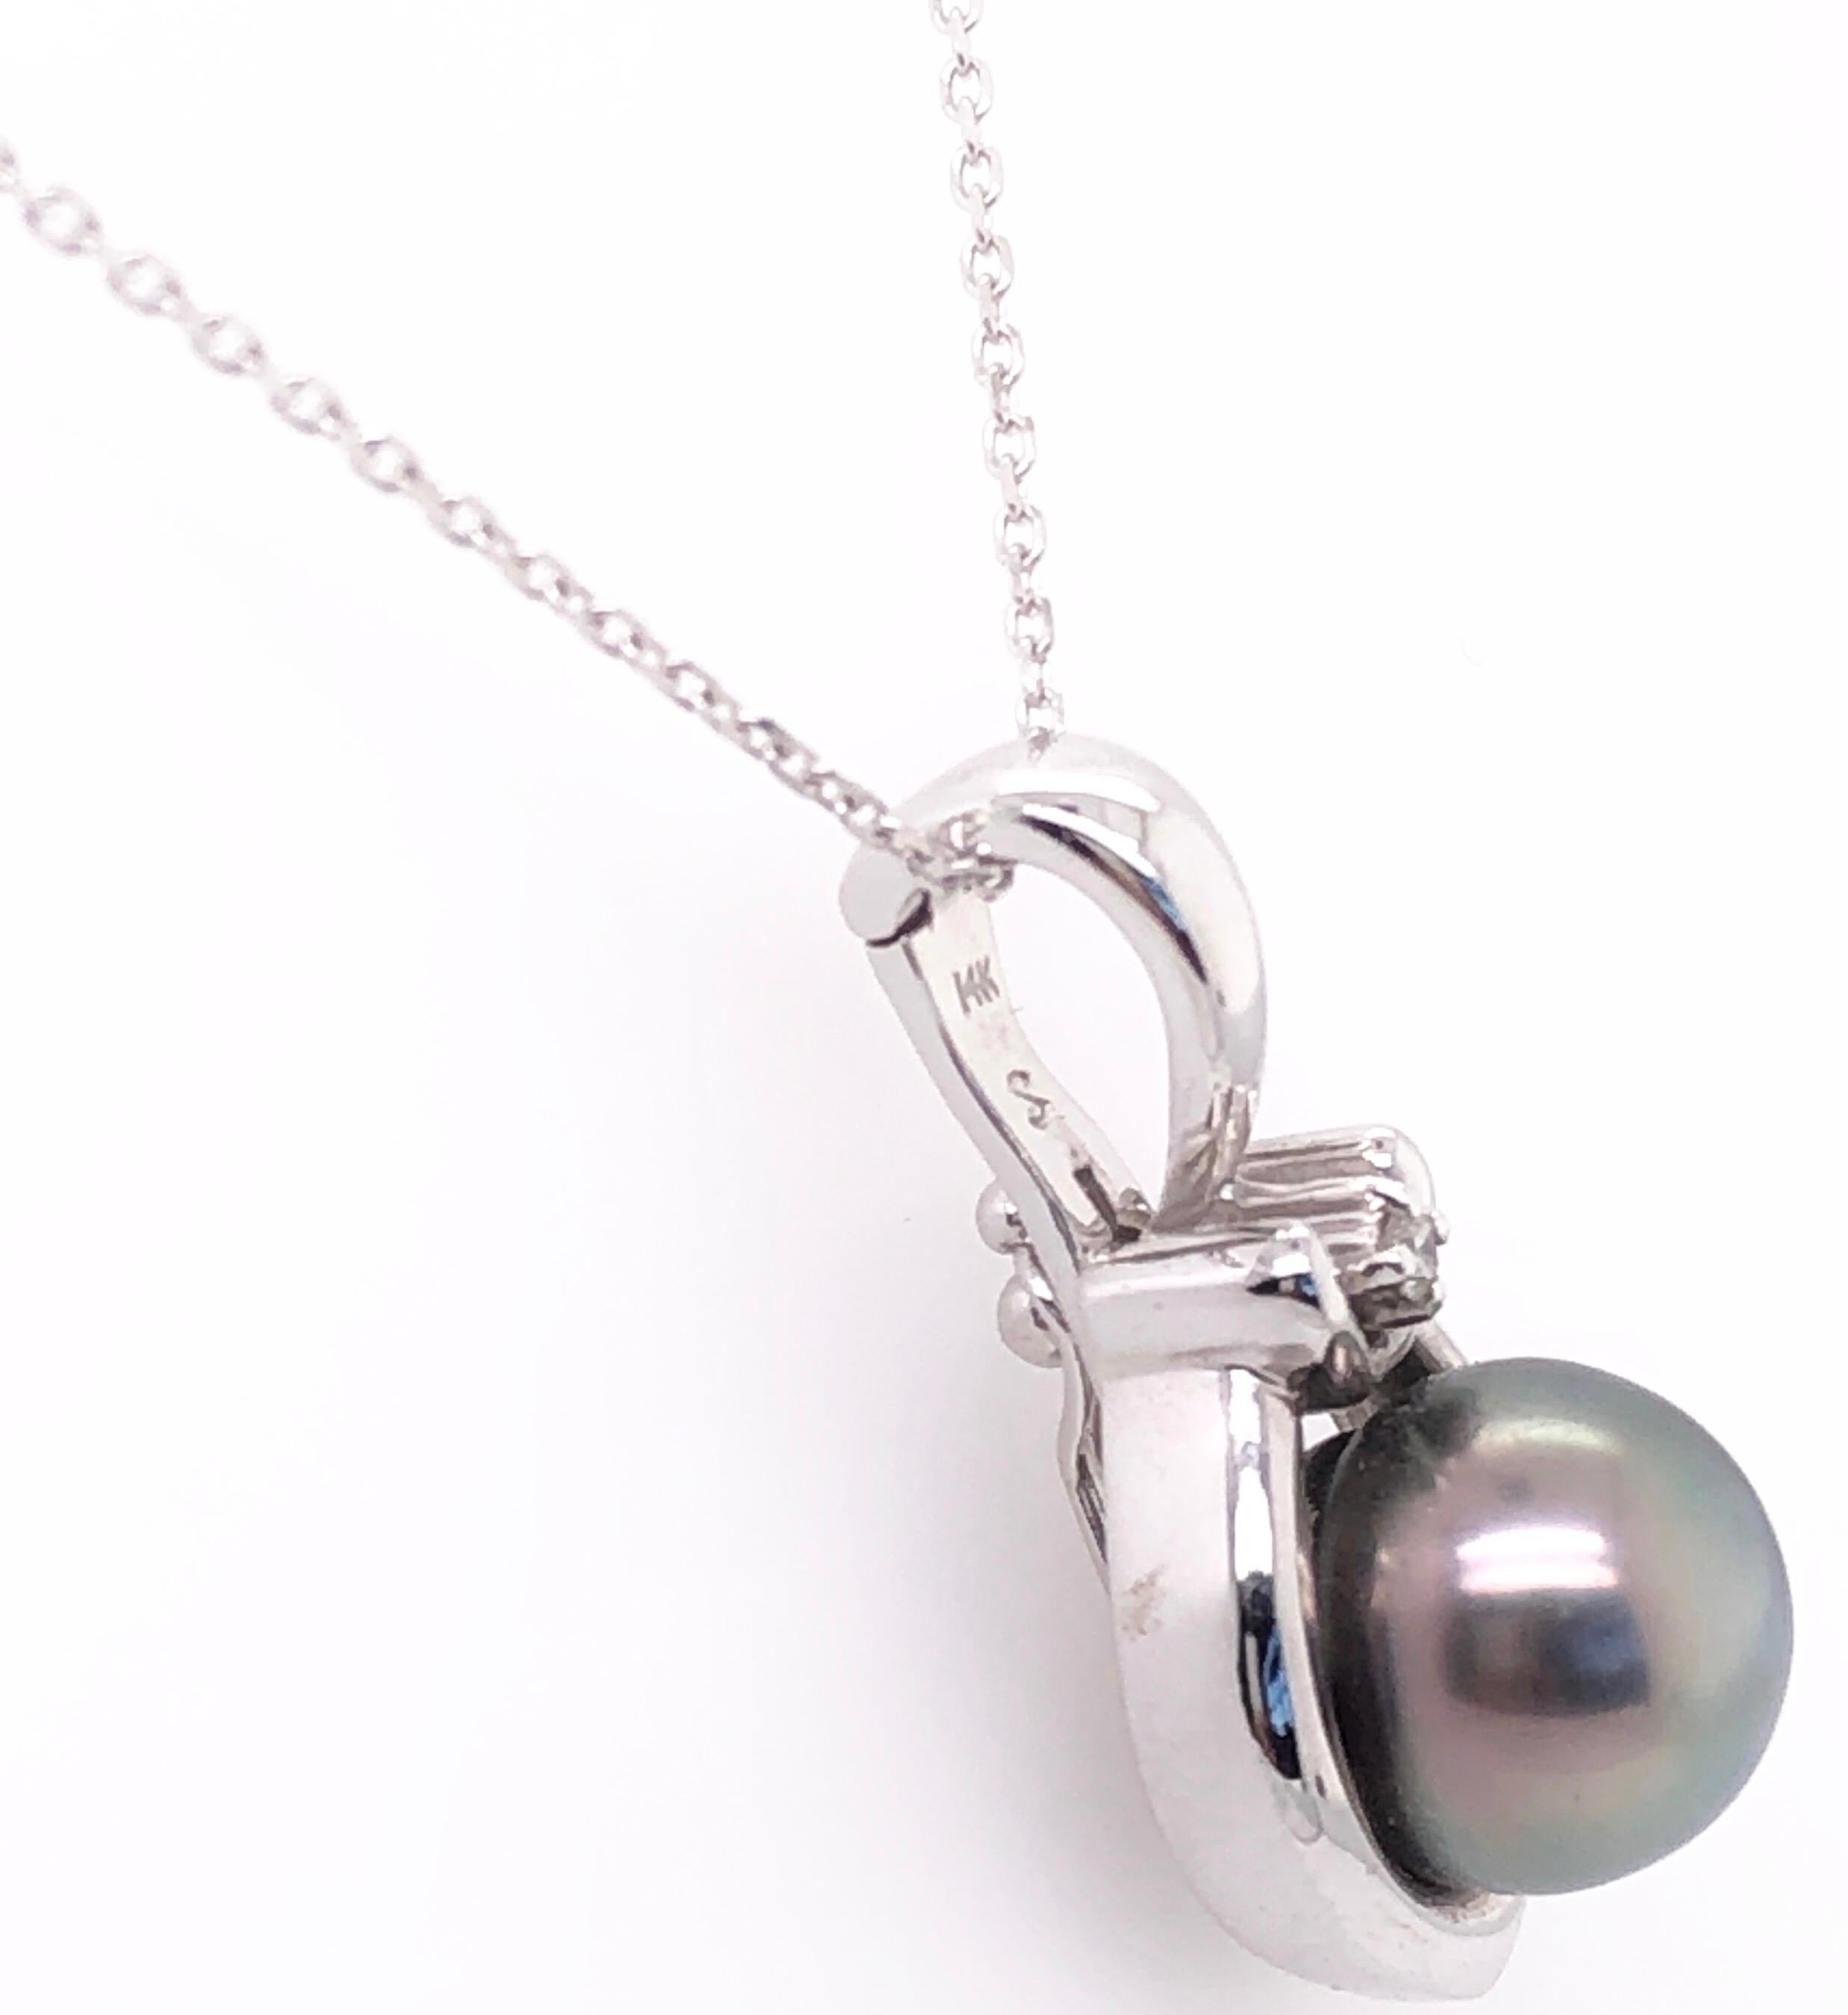 14 Karat White Gold 18 Inch Necklace with Cultured Pearl and Diamond Pendant.
6.39 grams total weight.